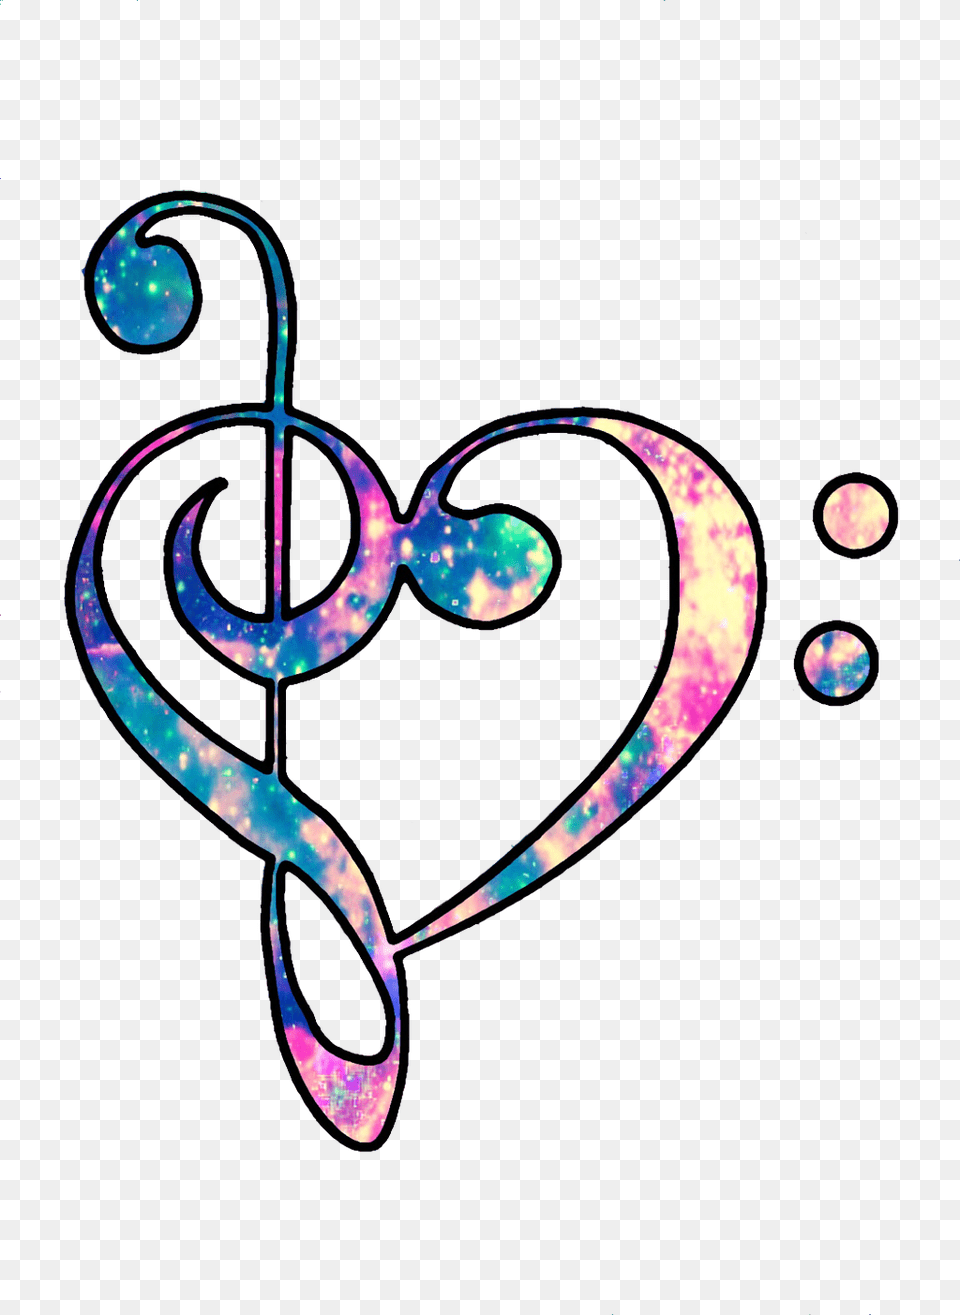 Ftestickers Hearts Love Music Trebleclef Musicnotes Colorful Treble Clef Heart, Accessories, Gemstone, Jewelry, Symbol Png Image